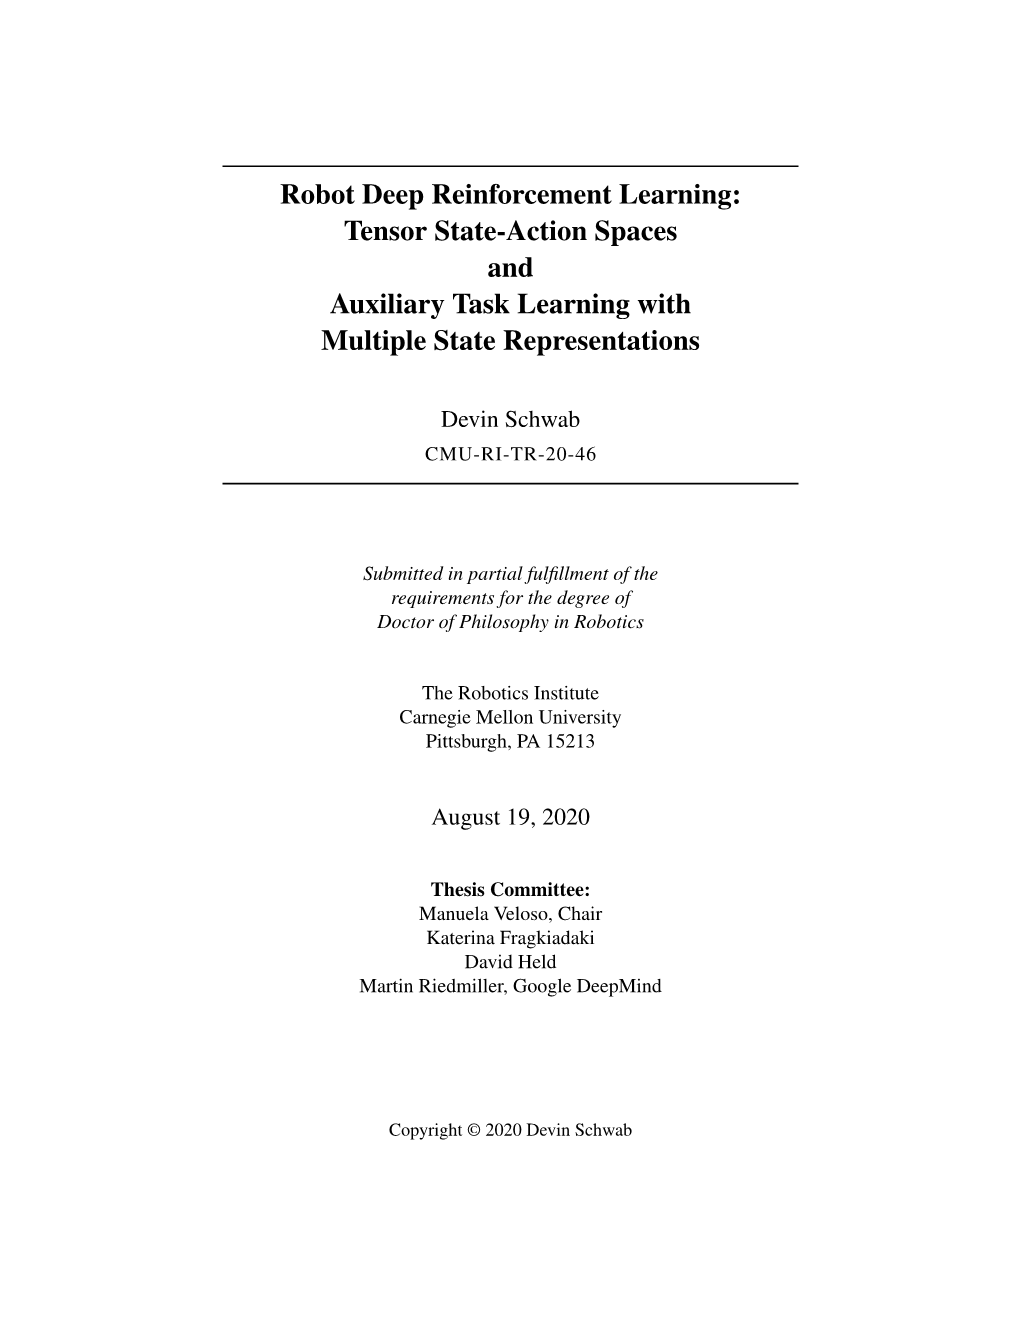 Robot Deep Reinforcement Learning: Tensor State-Action Spaces and Auxiliary Task Learning with Multiple State Representations